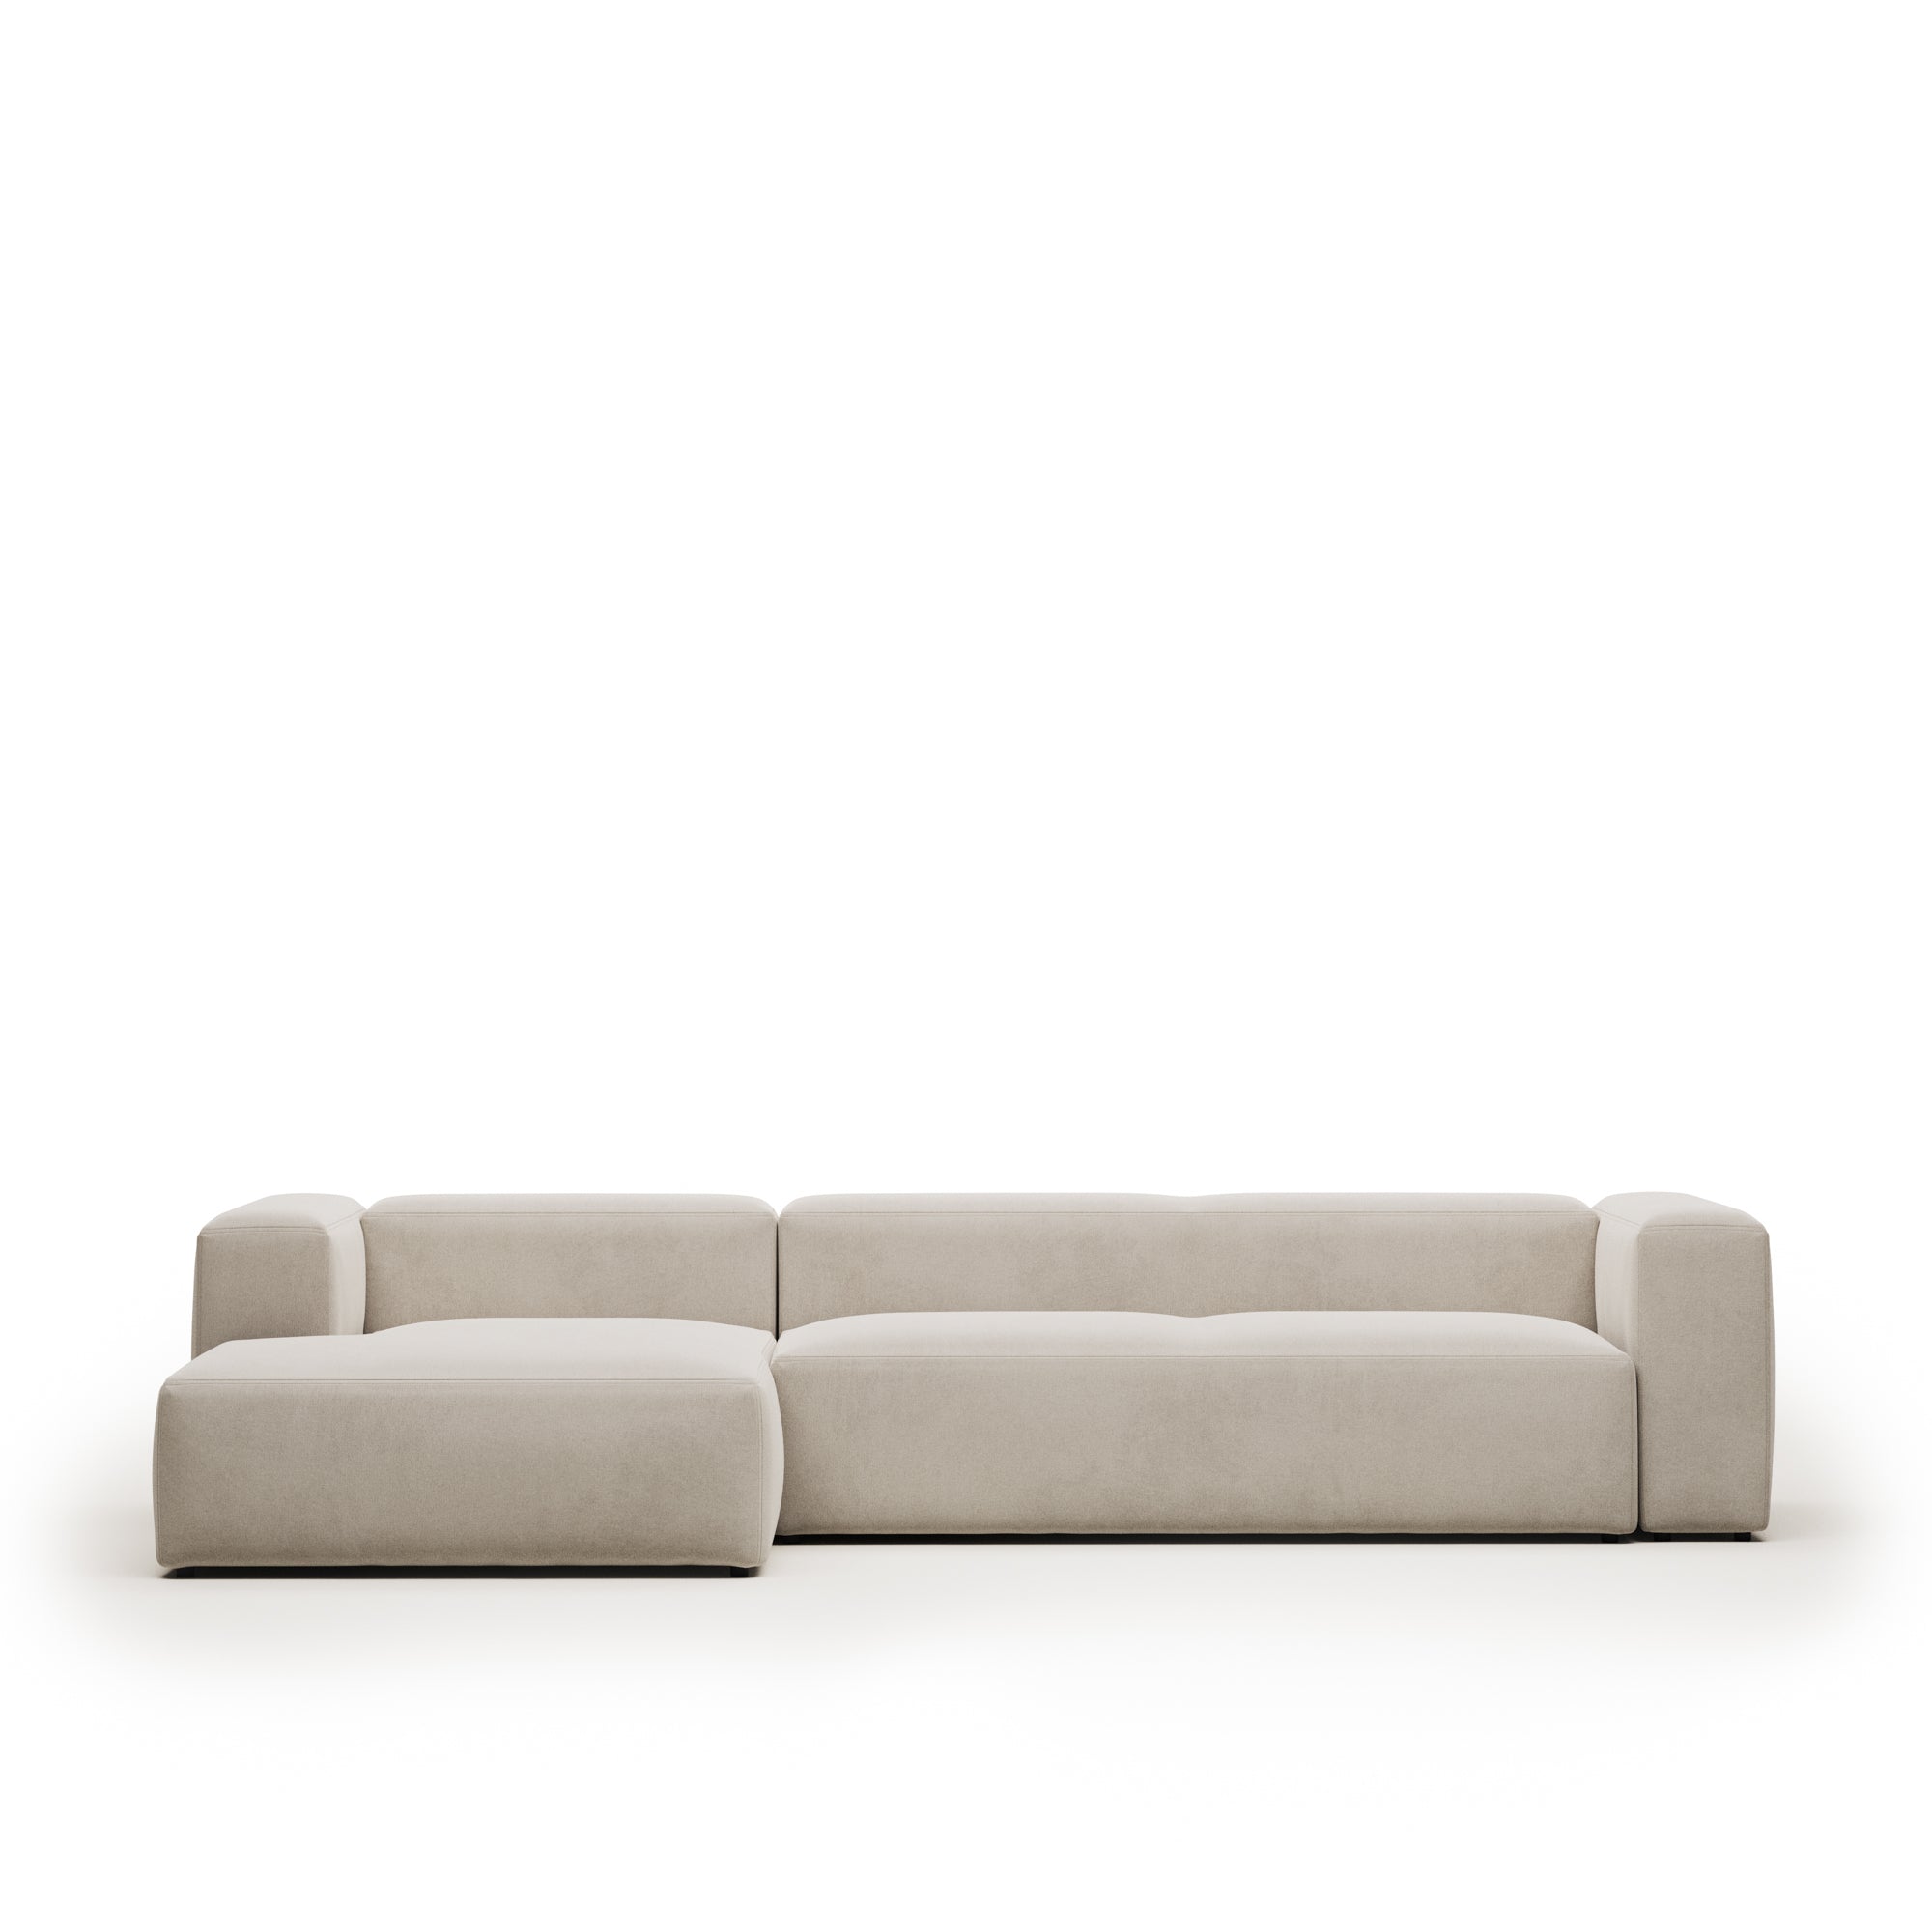 Blok 4 seater sofa with left-hand chaise longue in beige, 330 cm